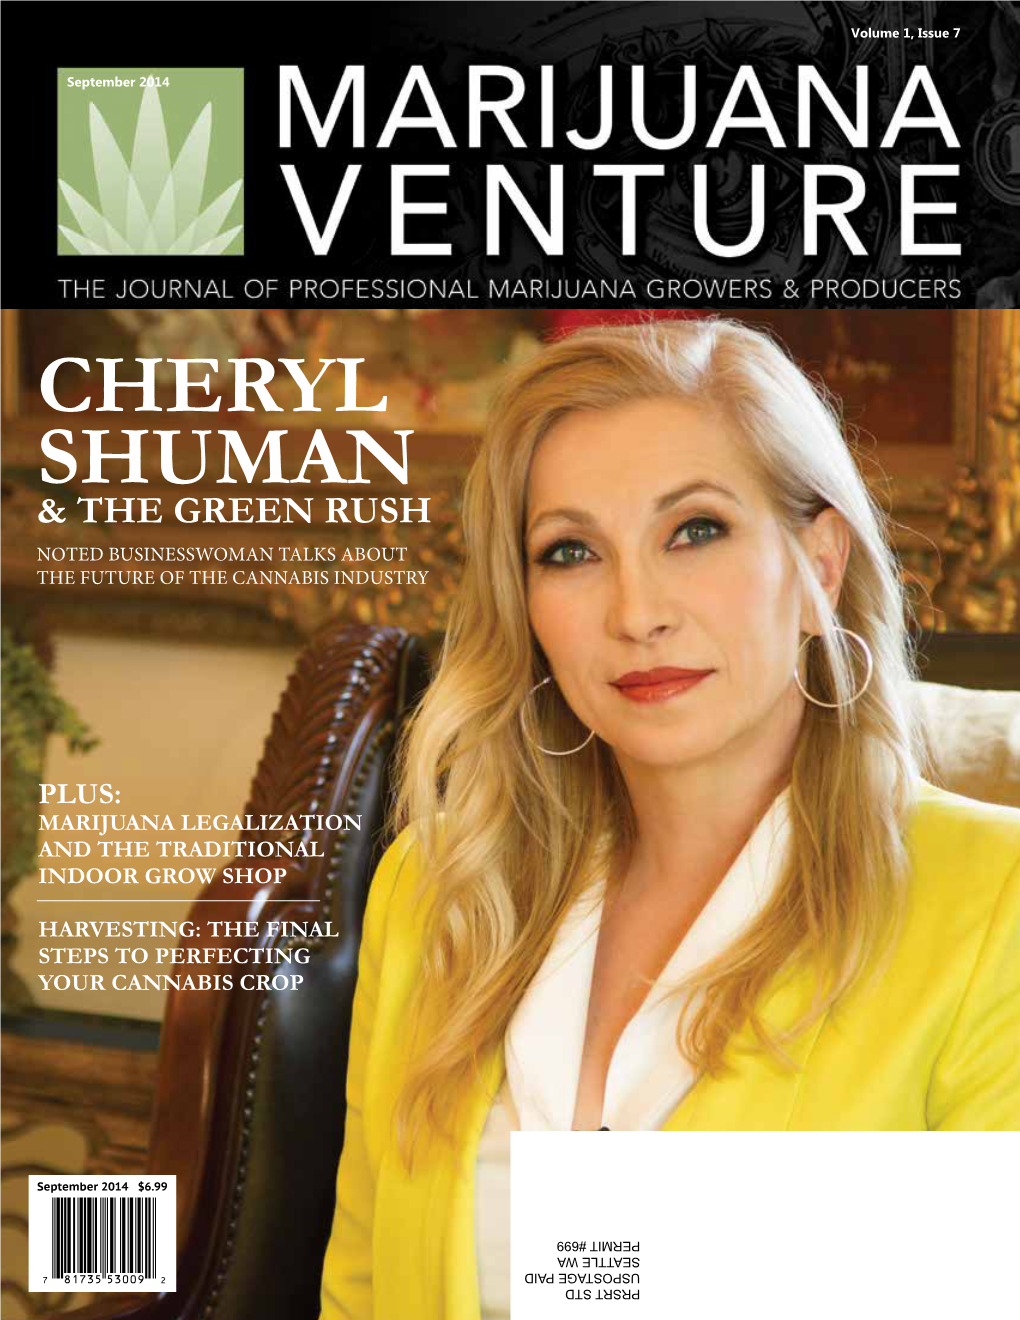 Cheryl Shuman & the Green Rush Noted Businesswoman Talks About the Future of the Cannabis Industry